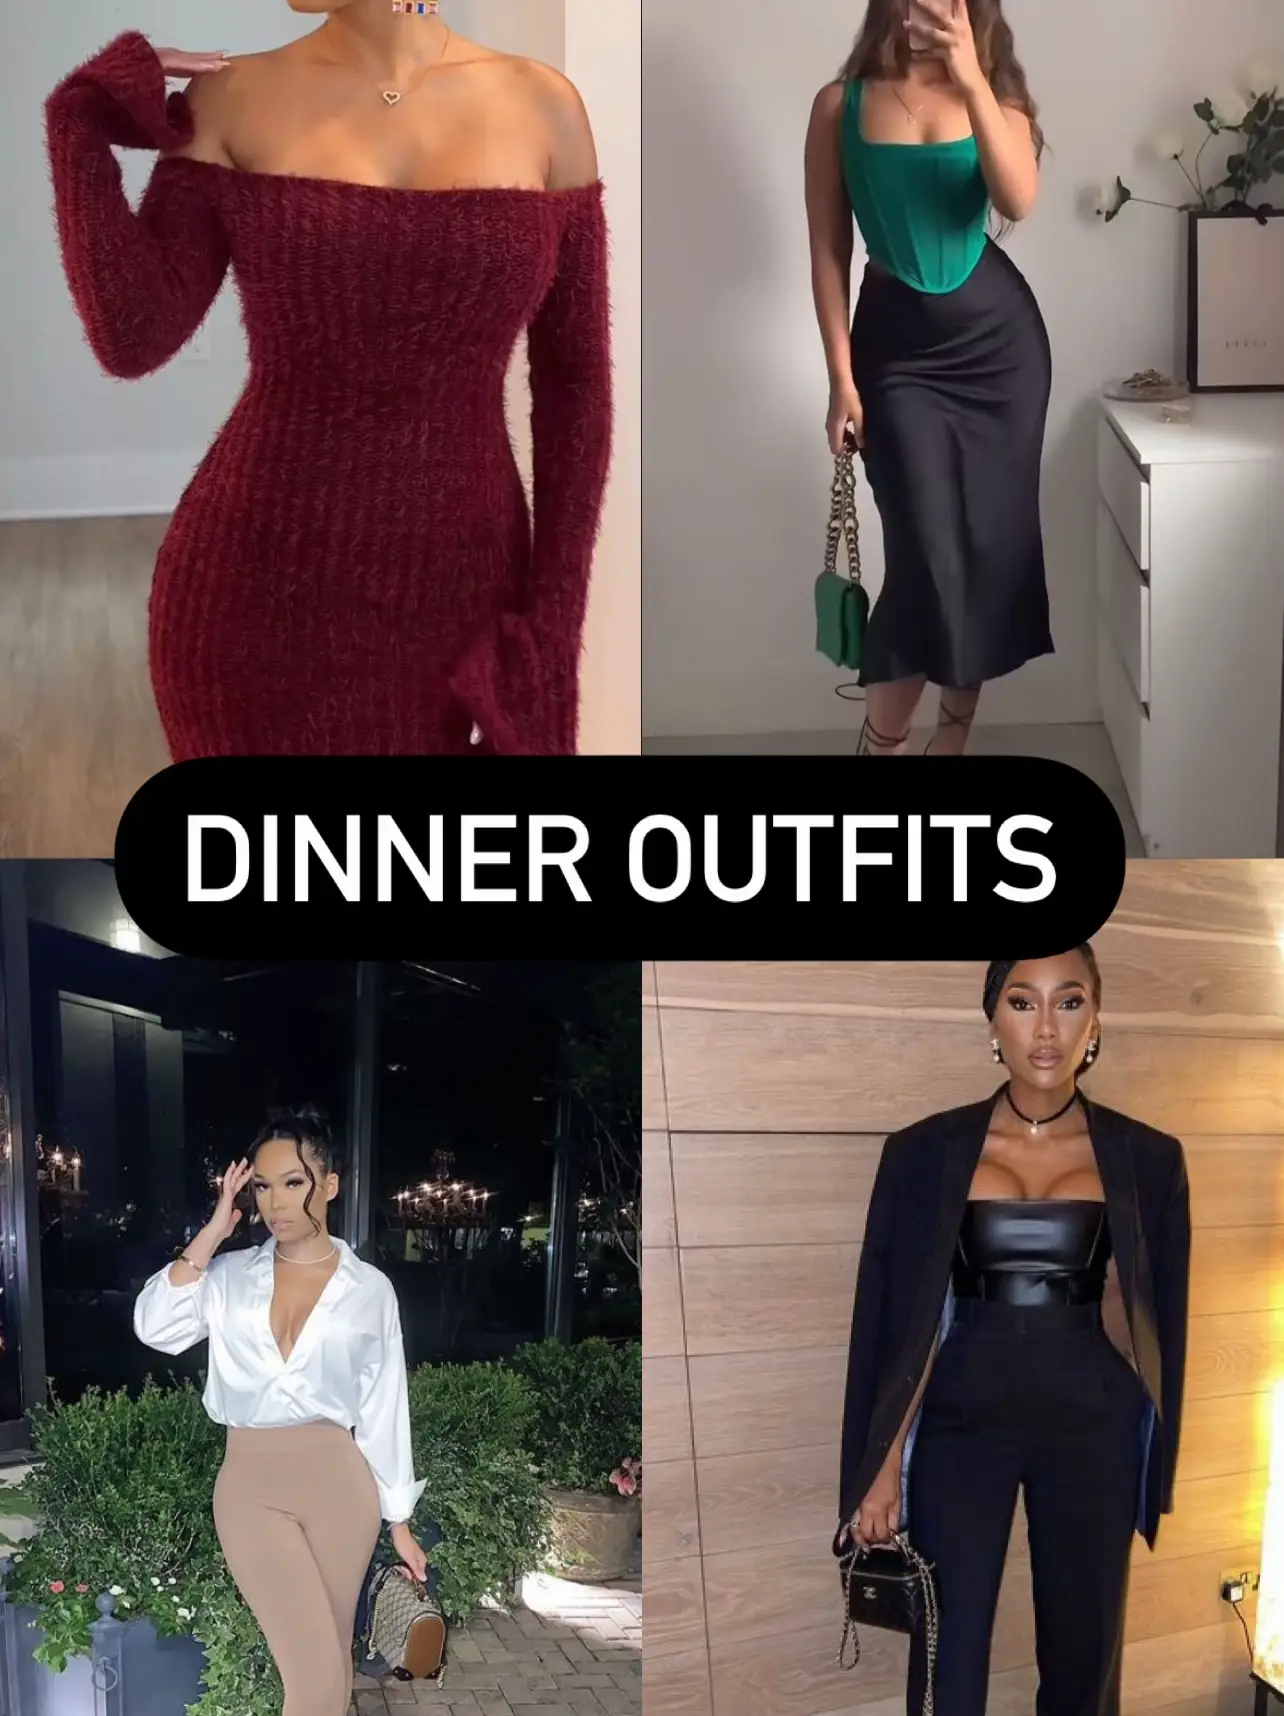 FESTIVE*  HOLIDAY OUTFIT IDEAS  midsize approved size 12 holiday  party looks #fashion 